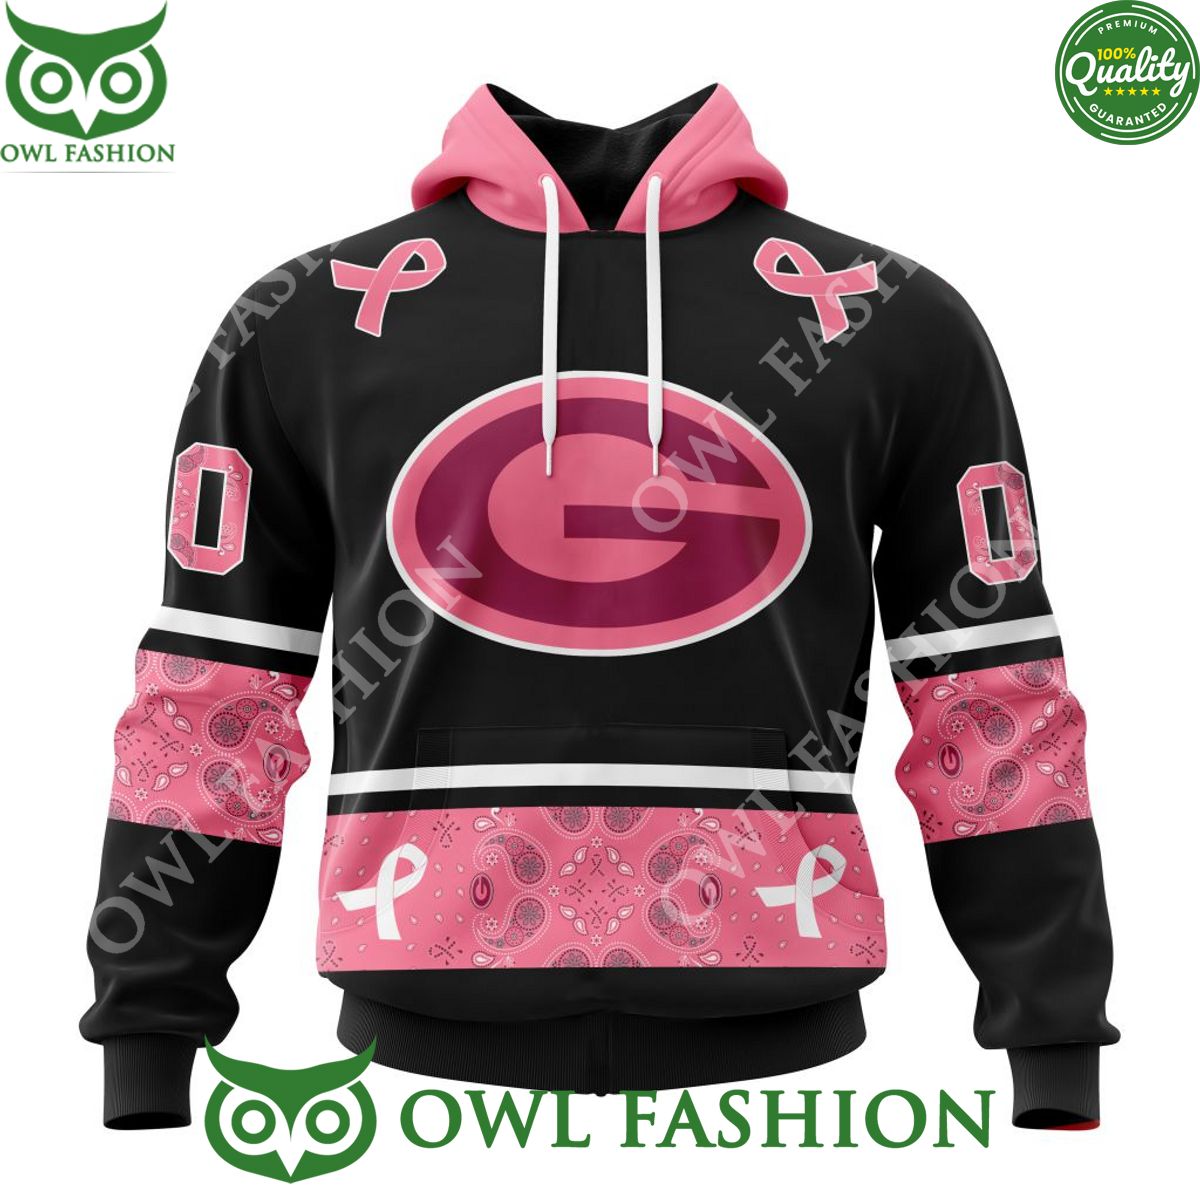 Personalized NFL Green Bay Packers Pink Breast Cancer 3D Hoodie Shirt Coolosm